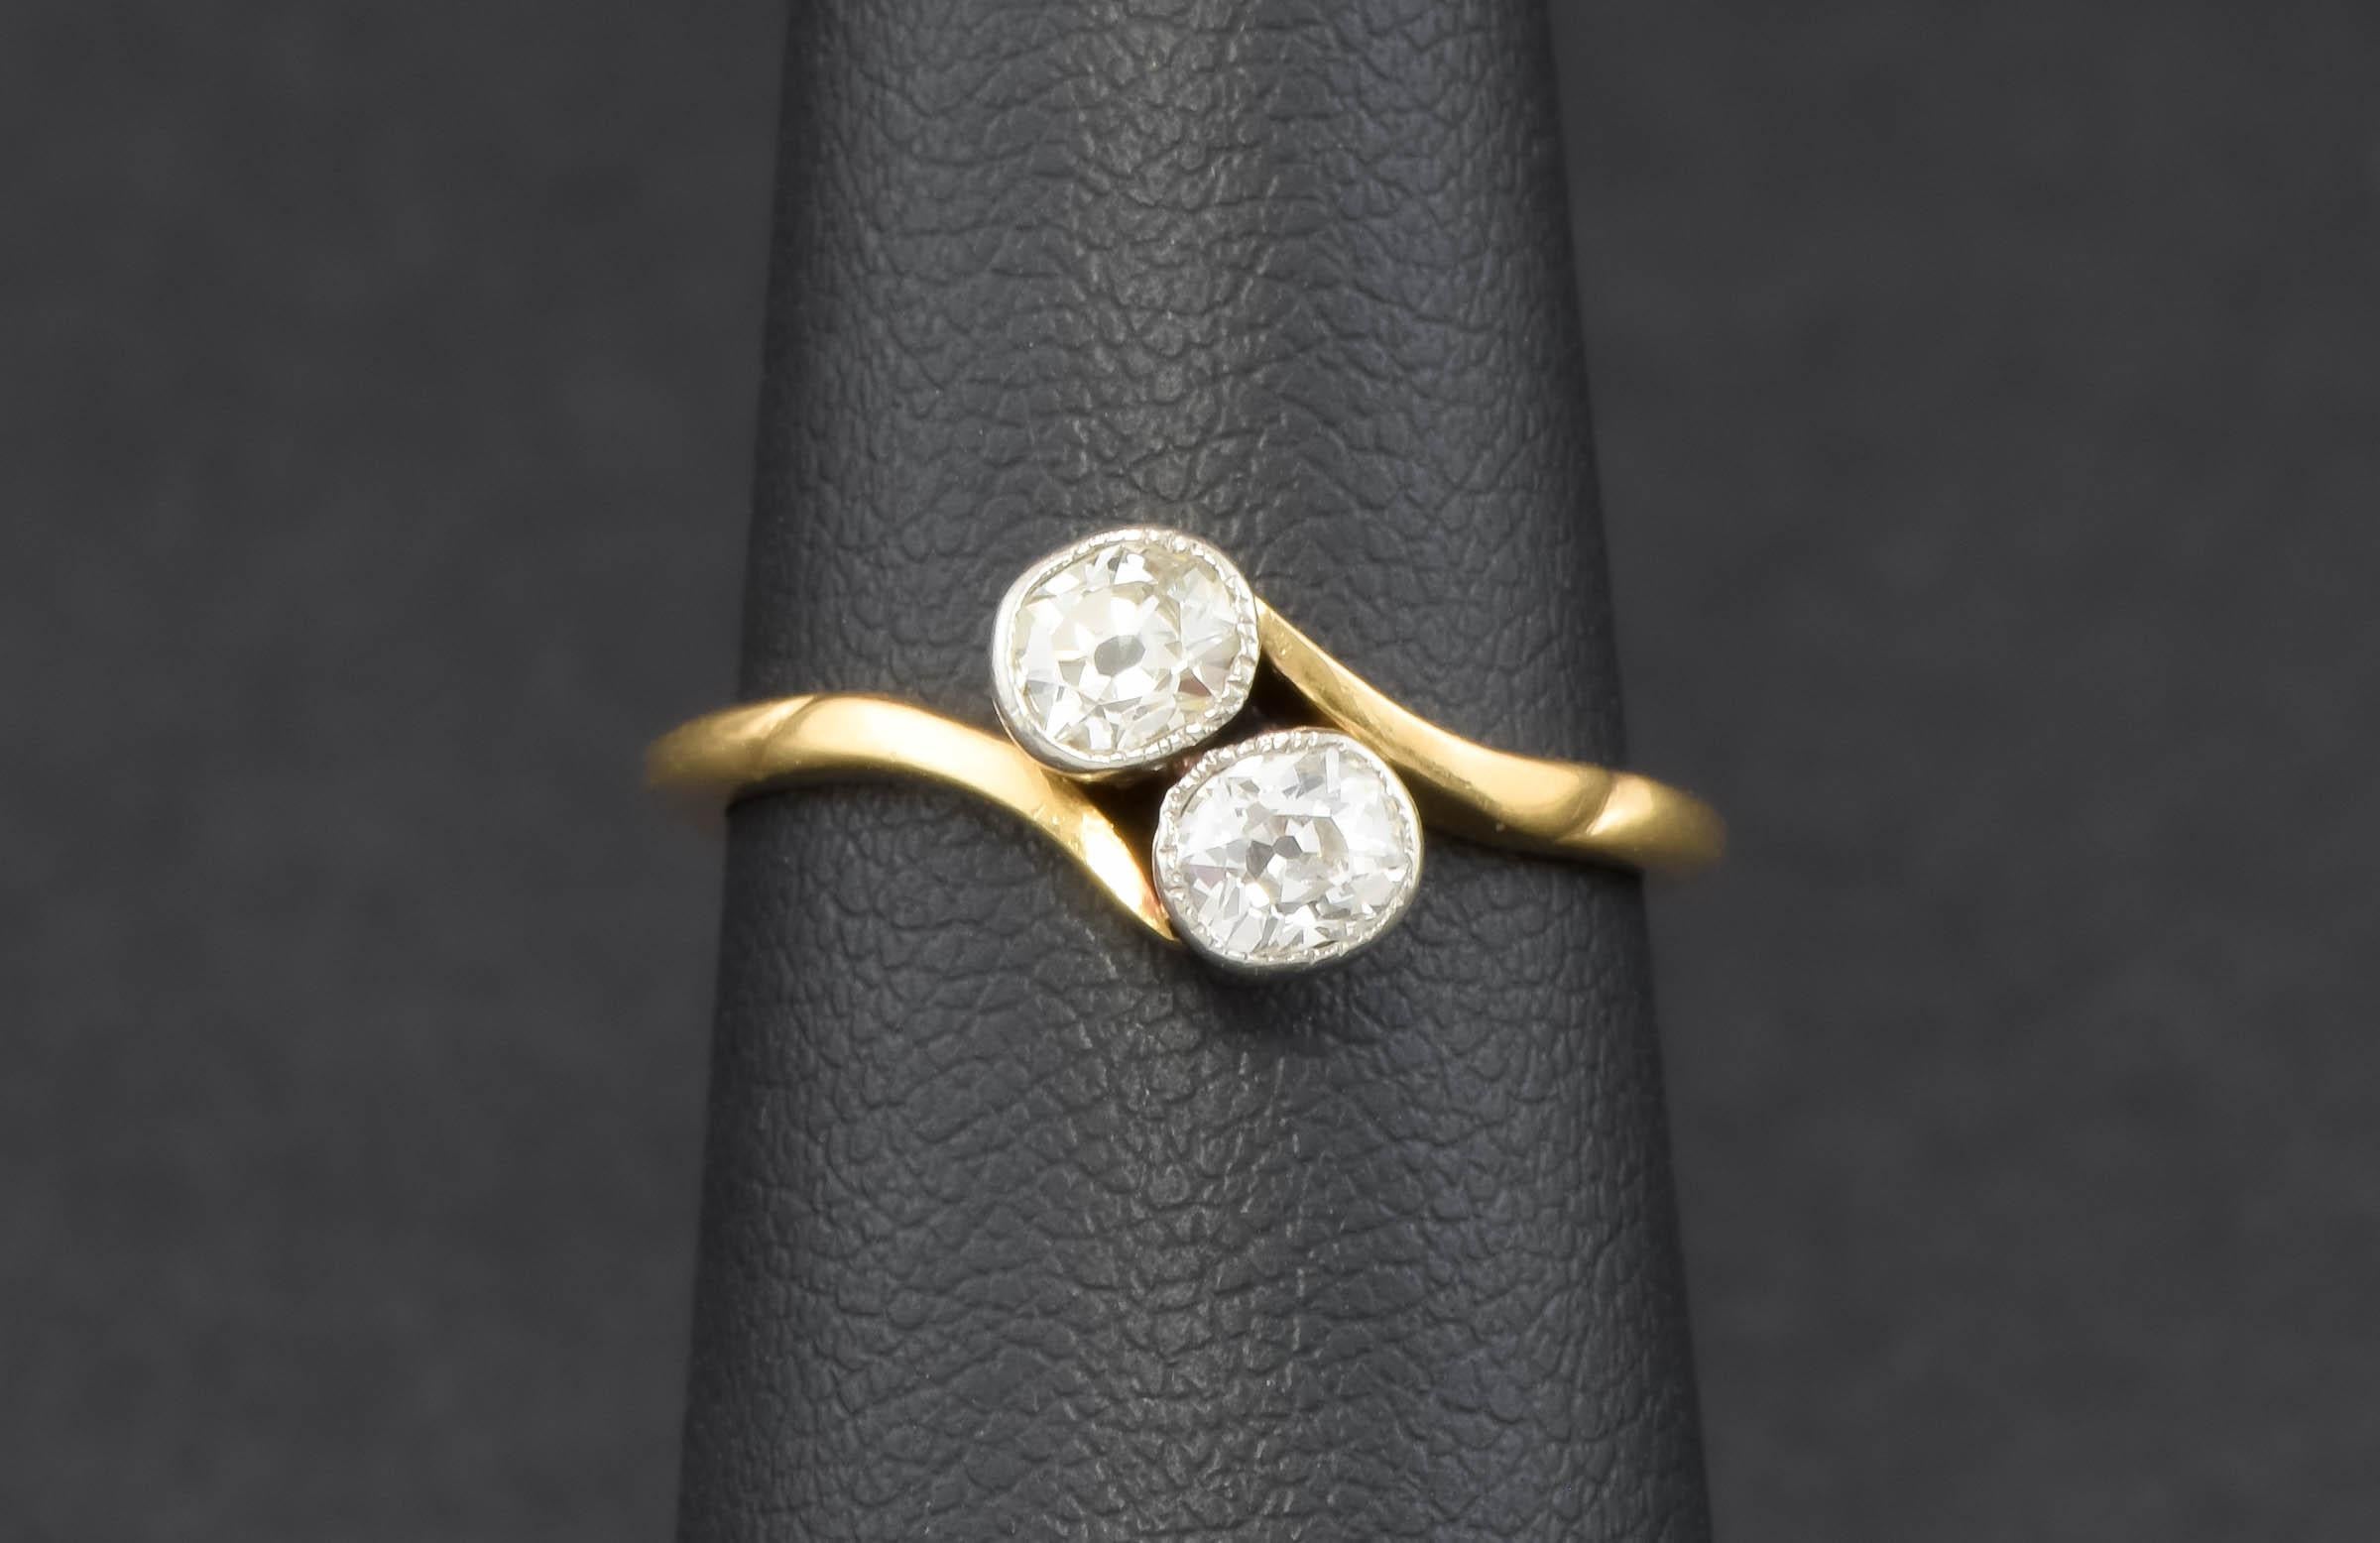 
A lovely and romantic ring, this elegant Toi et Moi (translating to 